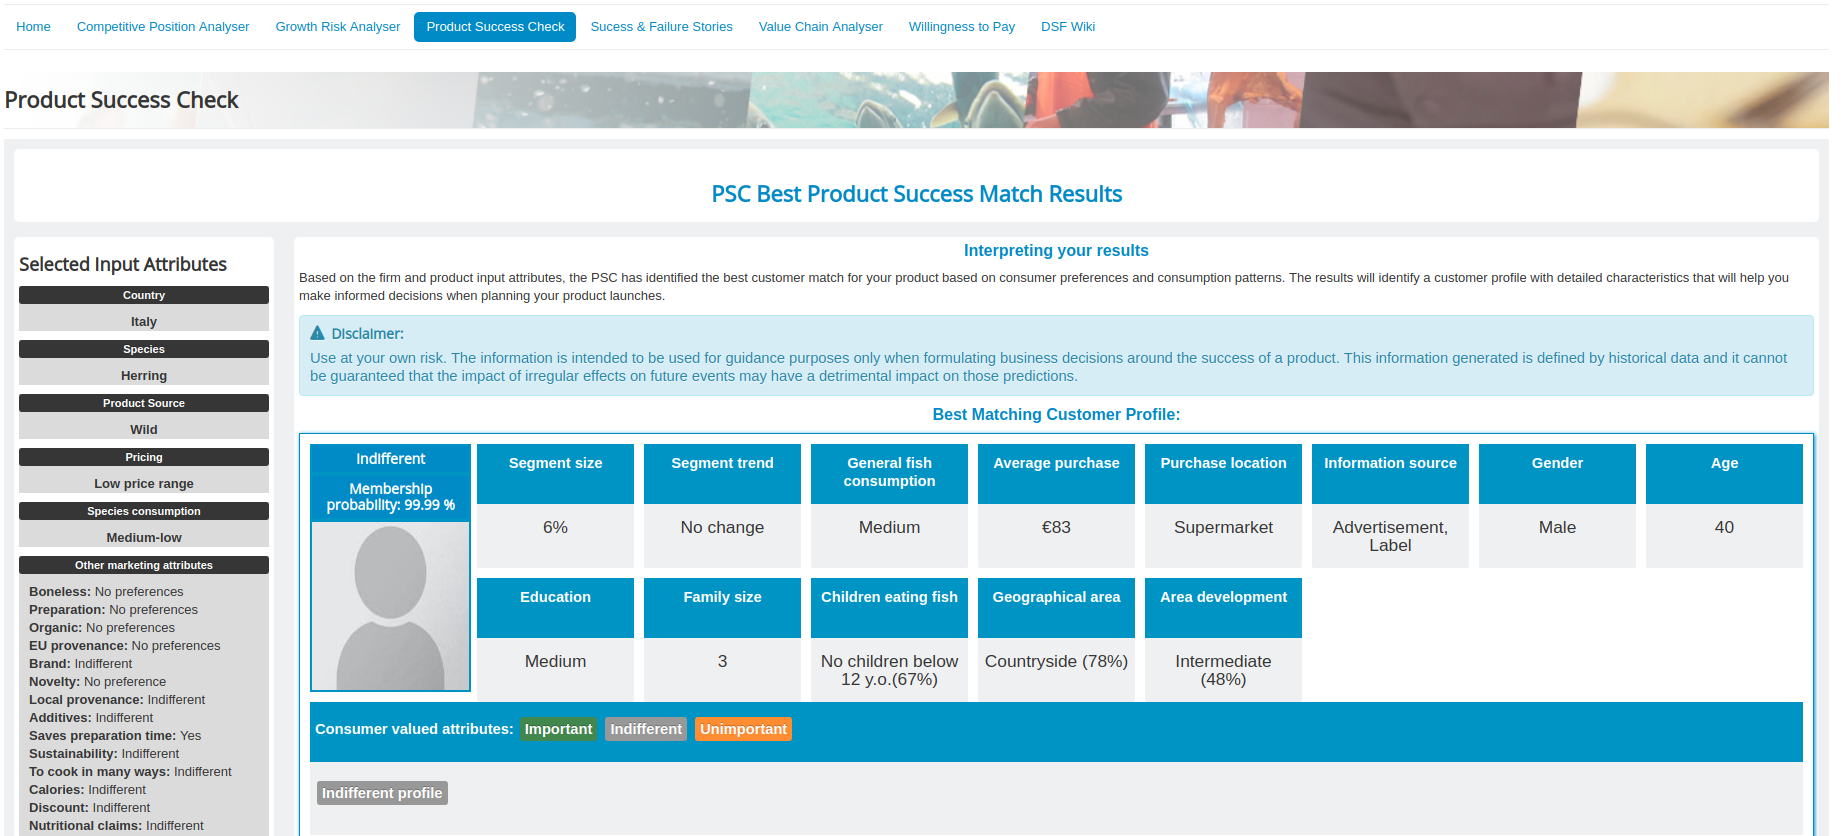 PSC results page